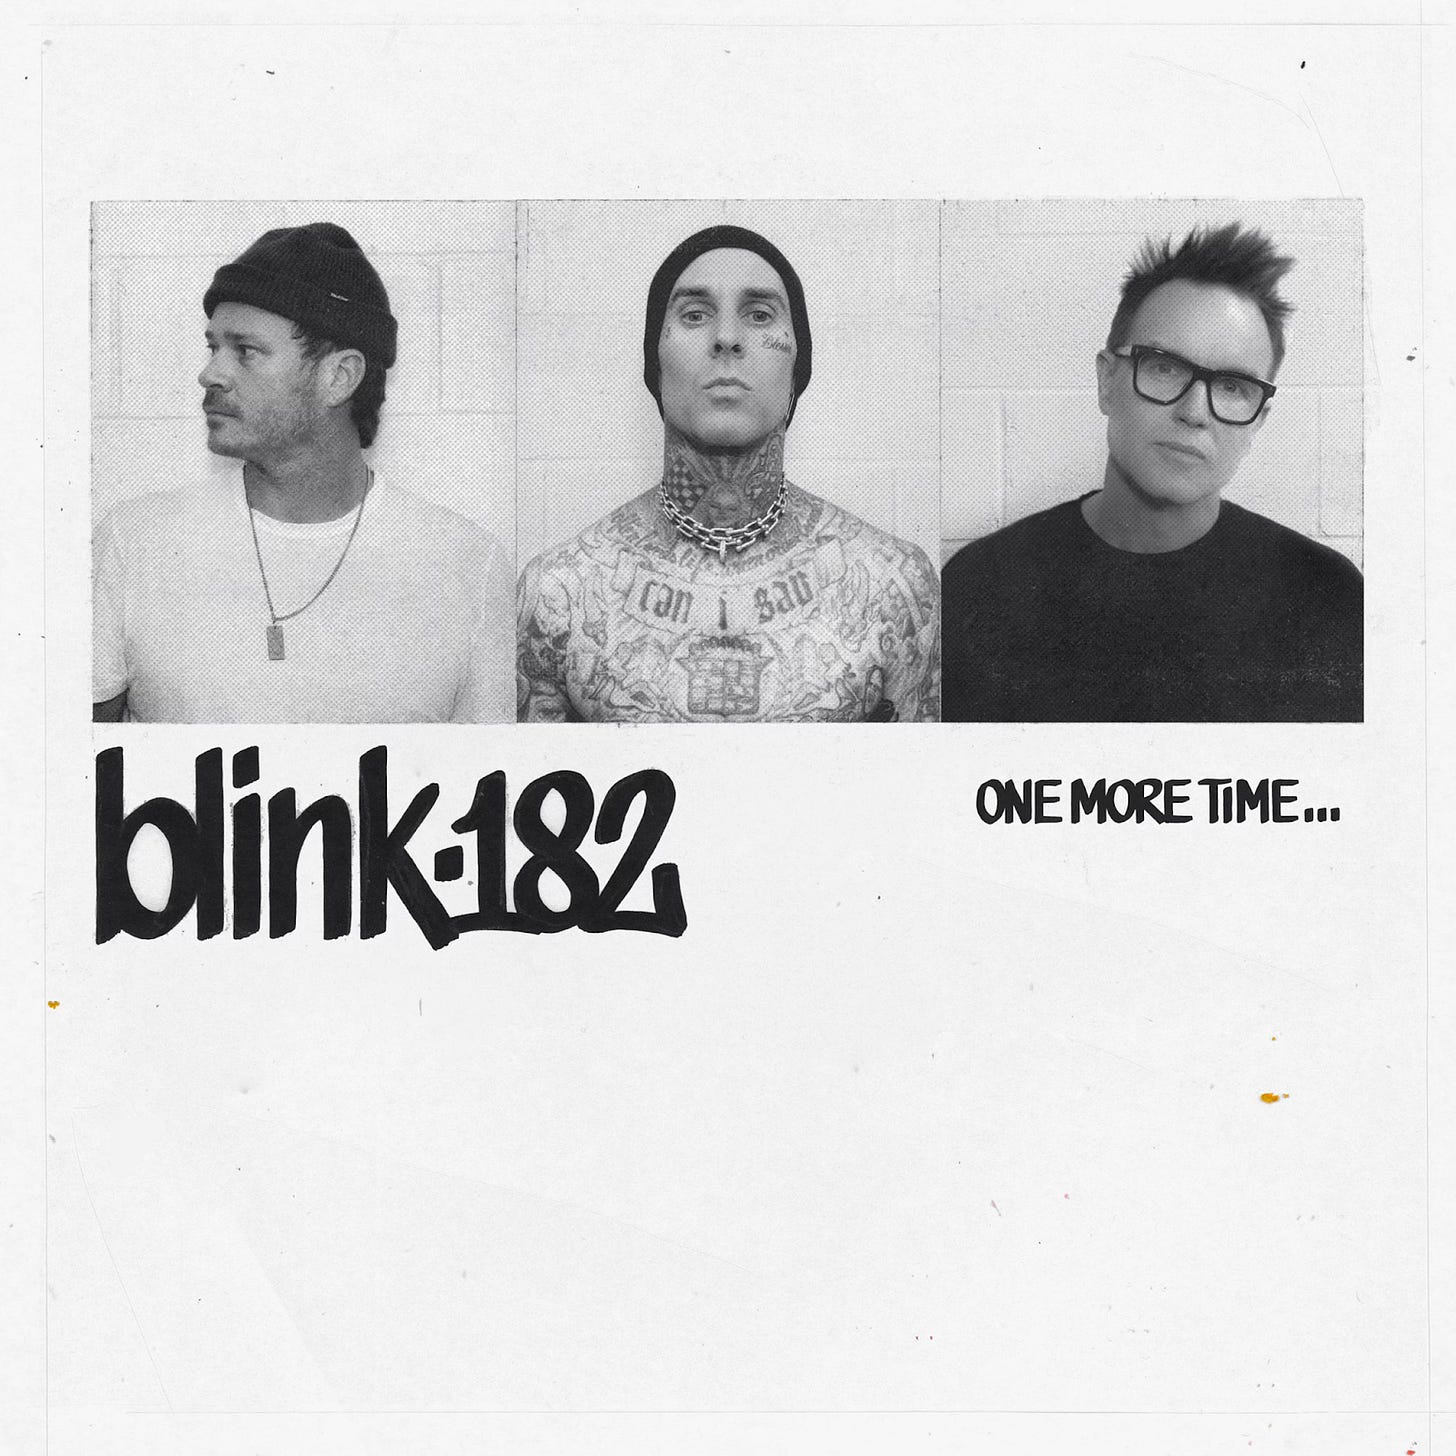 Tom DeLonge Hints at Possible Return to Blink-182 with Throwback Photo